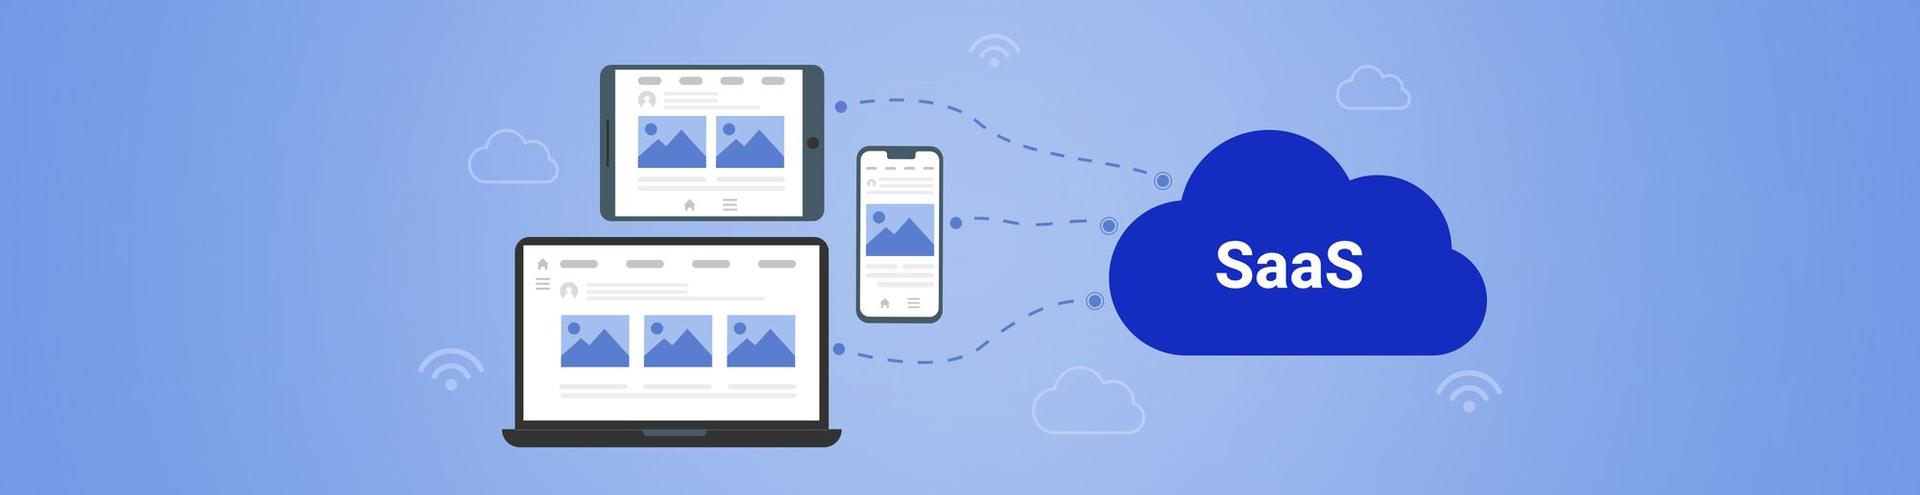 Traditional App Migration to SaaS